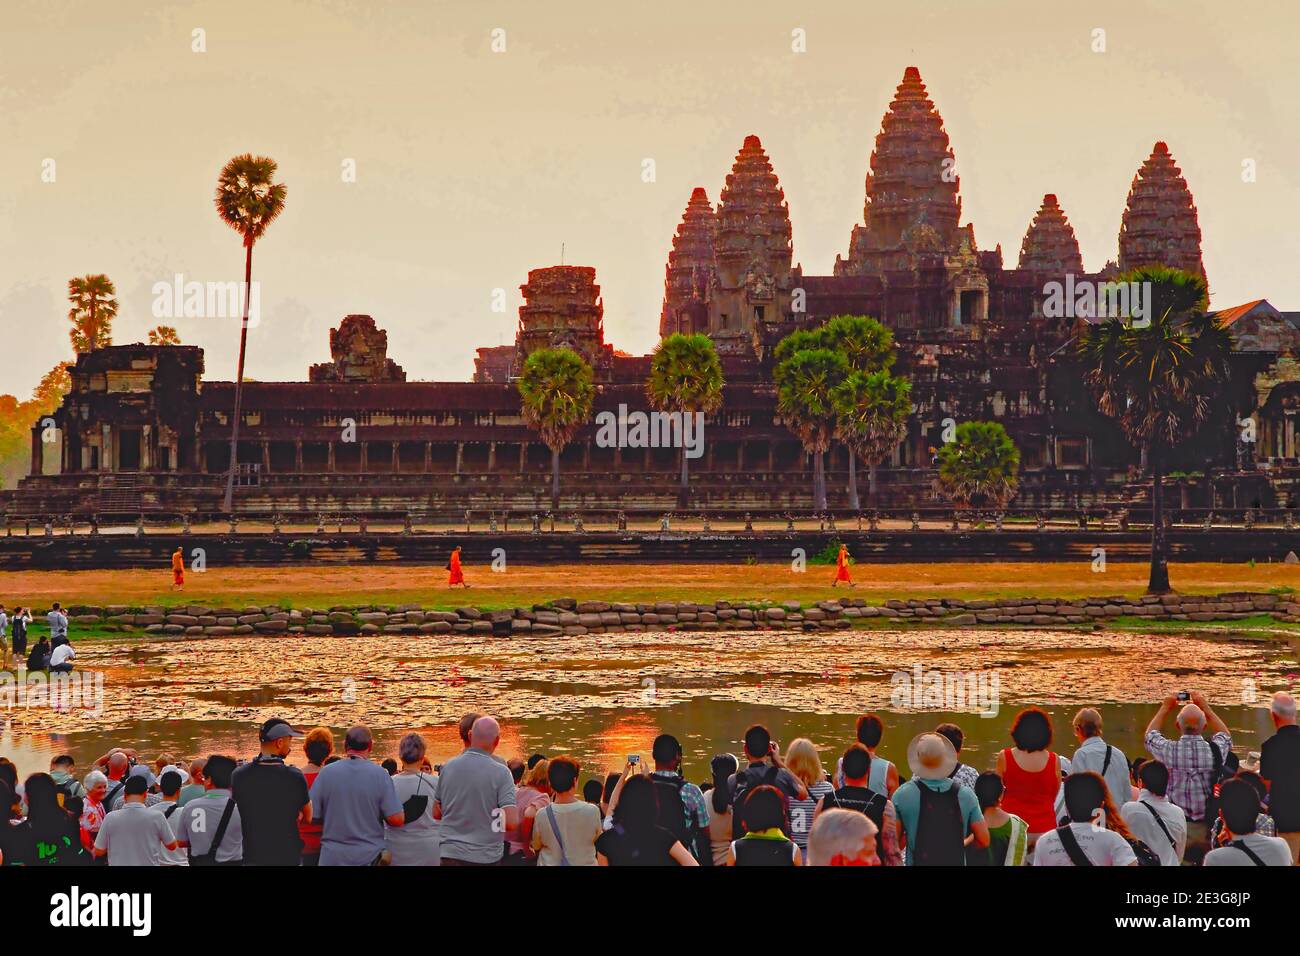 Tourists wait for the daily 'Sun up' delight at ANGKOR WAT, Siem Reap, Cambodia as three Buddhist monks walk to prayers. Stock Photo